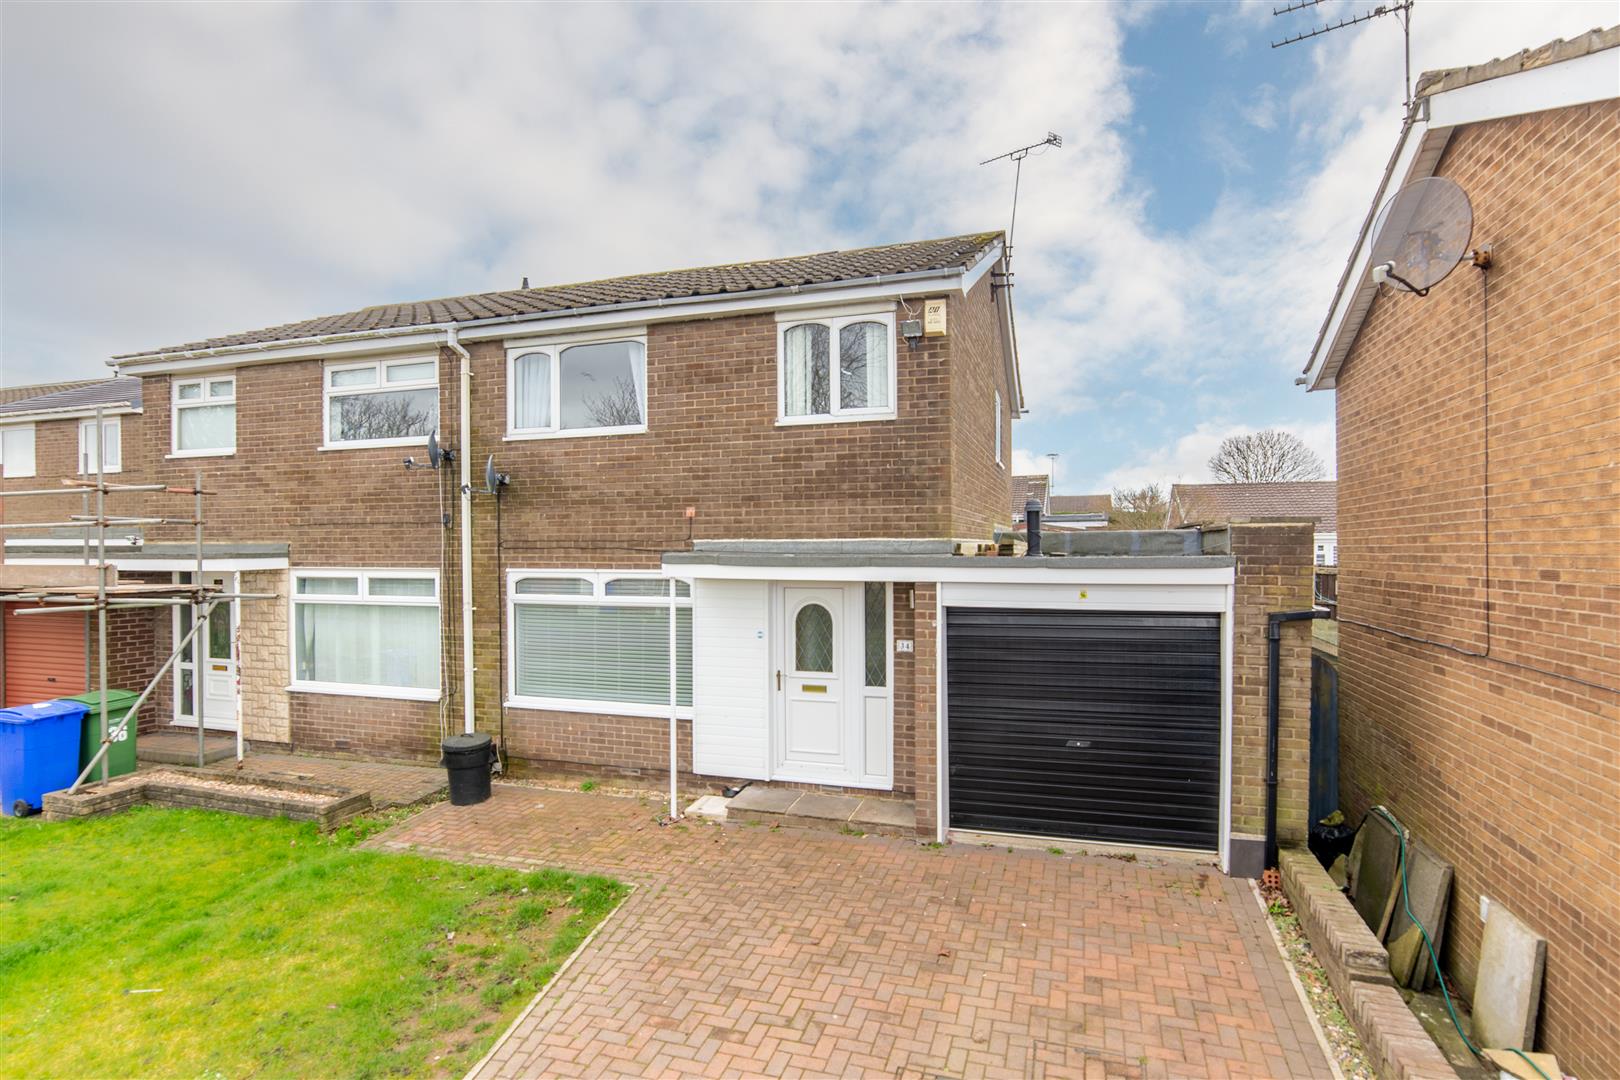 3 bed semi-detached house for sale in Ringwood Drive, Cramlington - Property Image 1